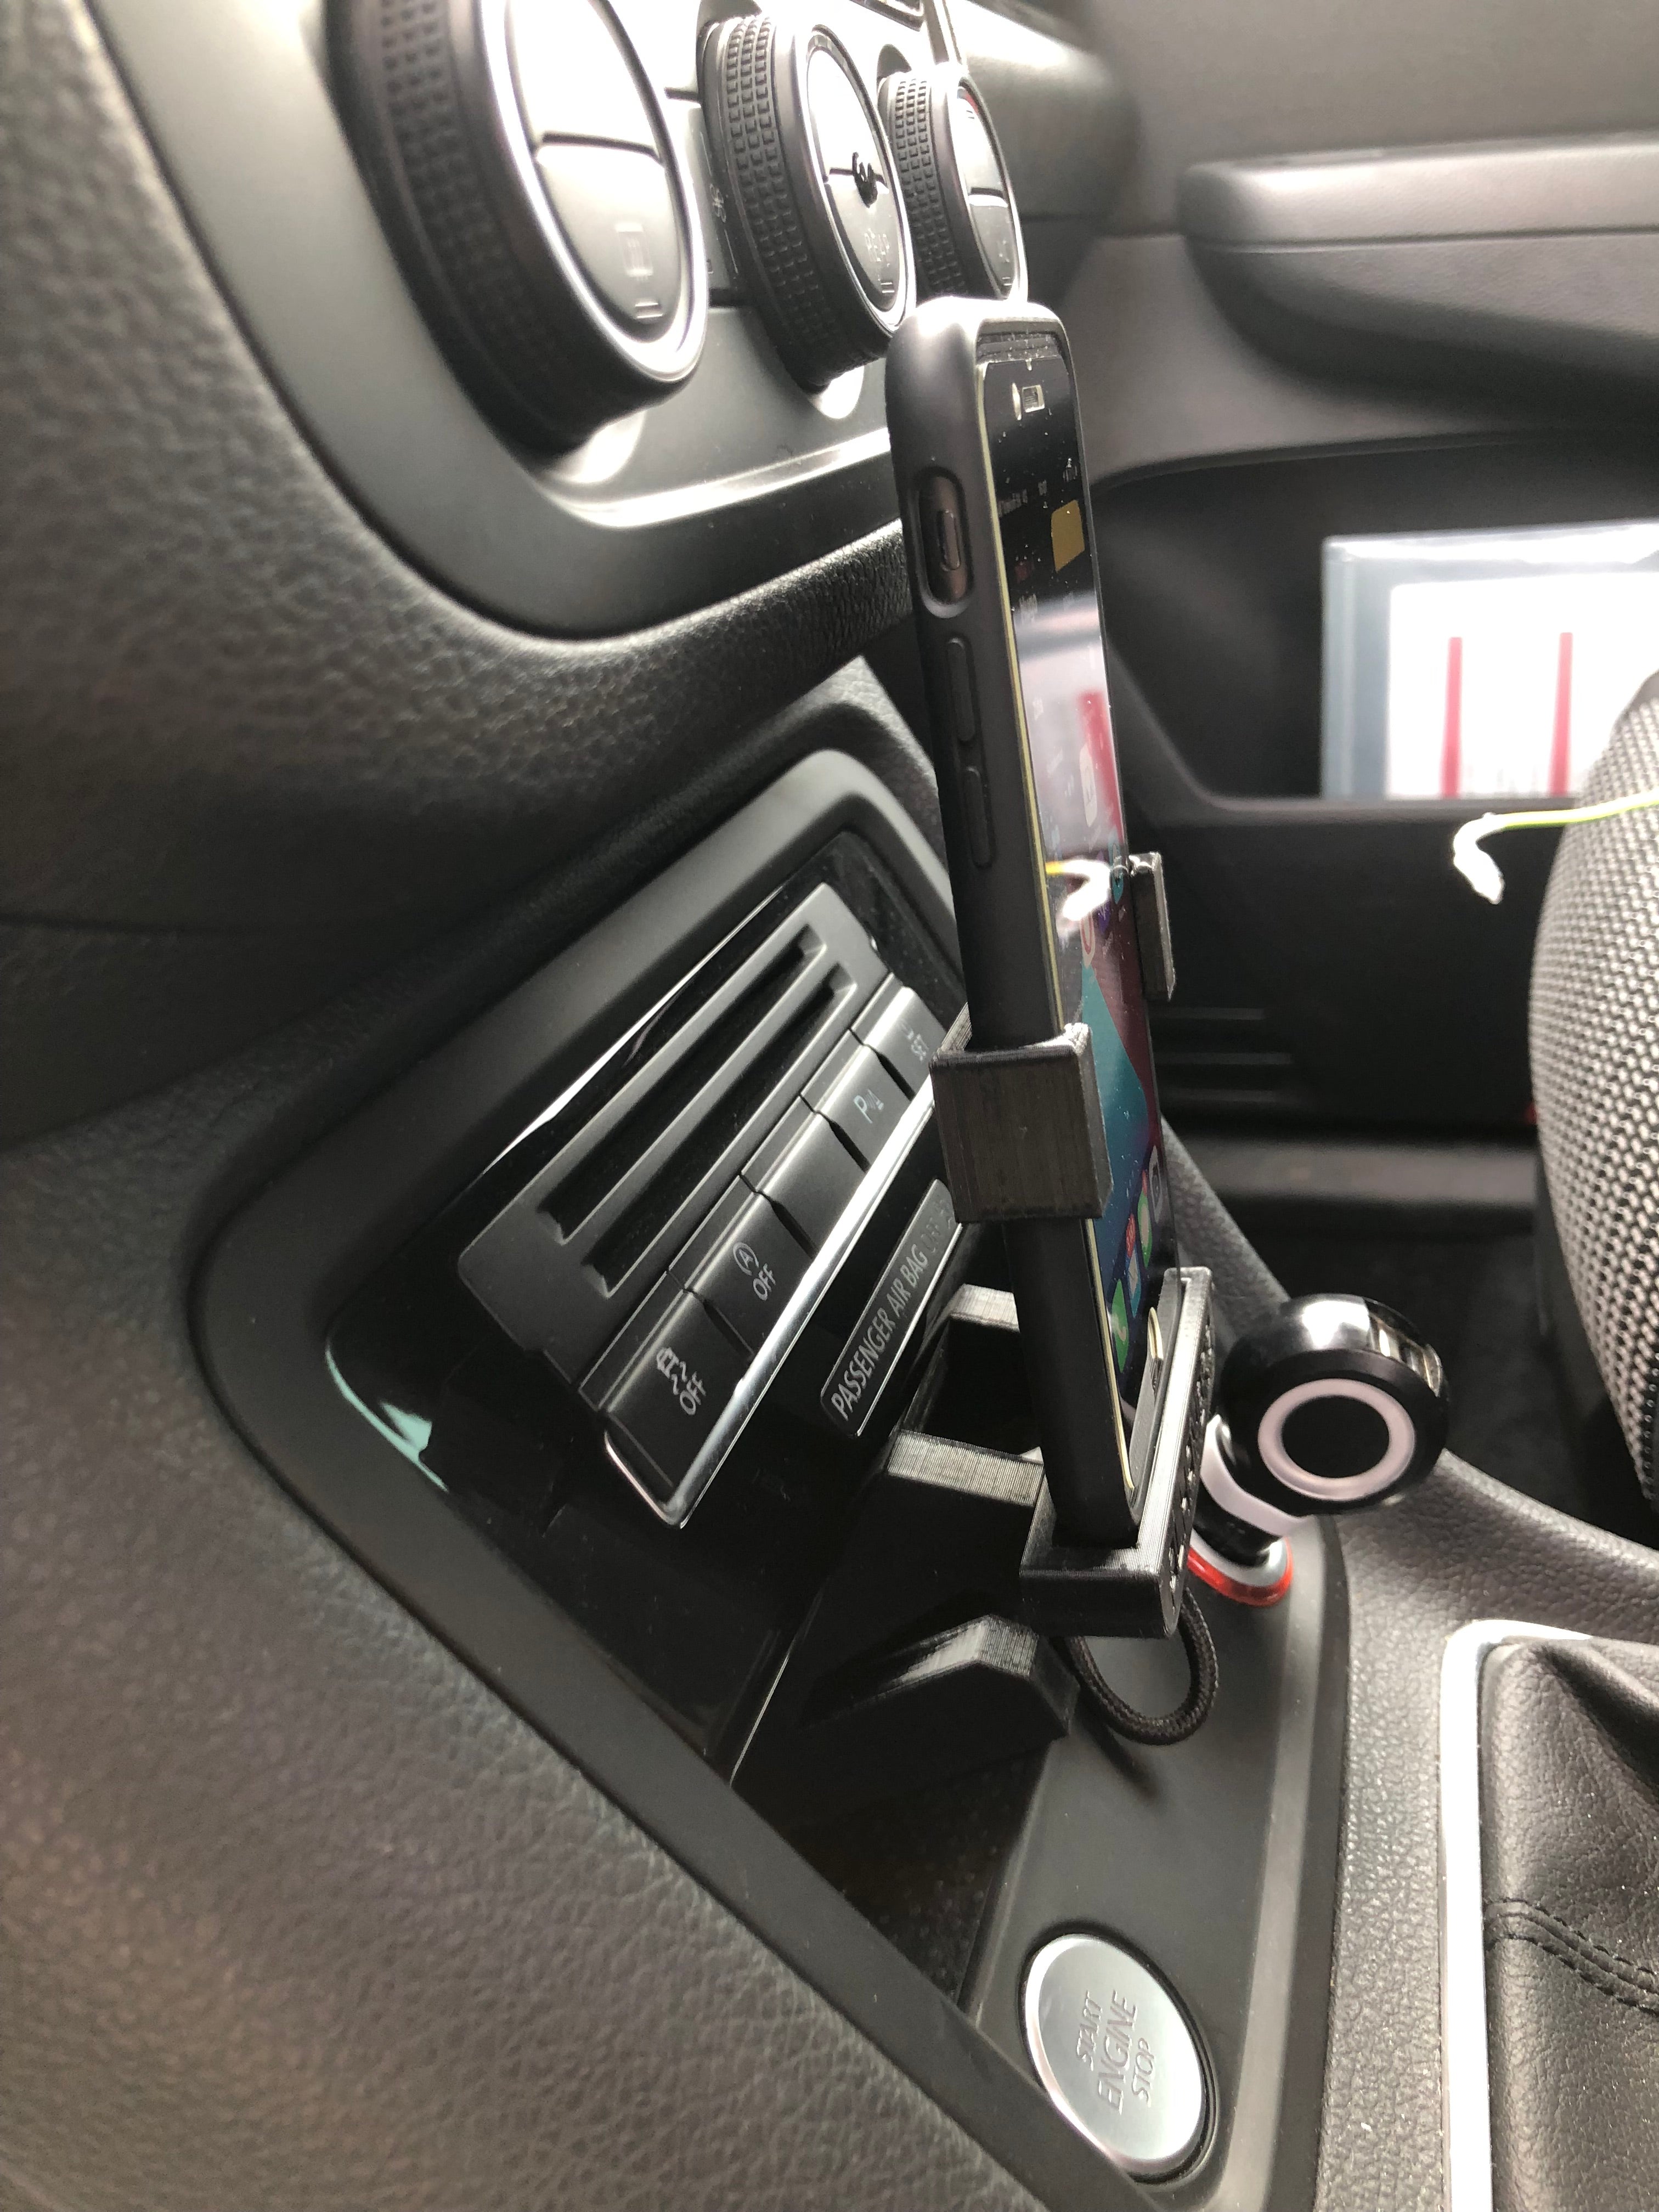 Upgraded Docking Car Holder for iPhone8 to SEAT FullLink Ver 2.0